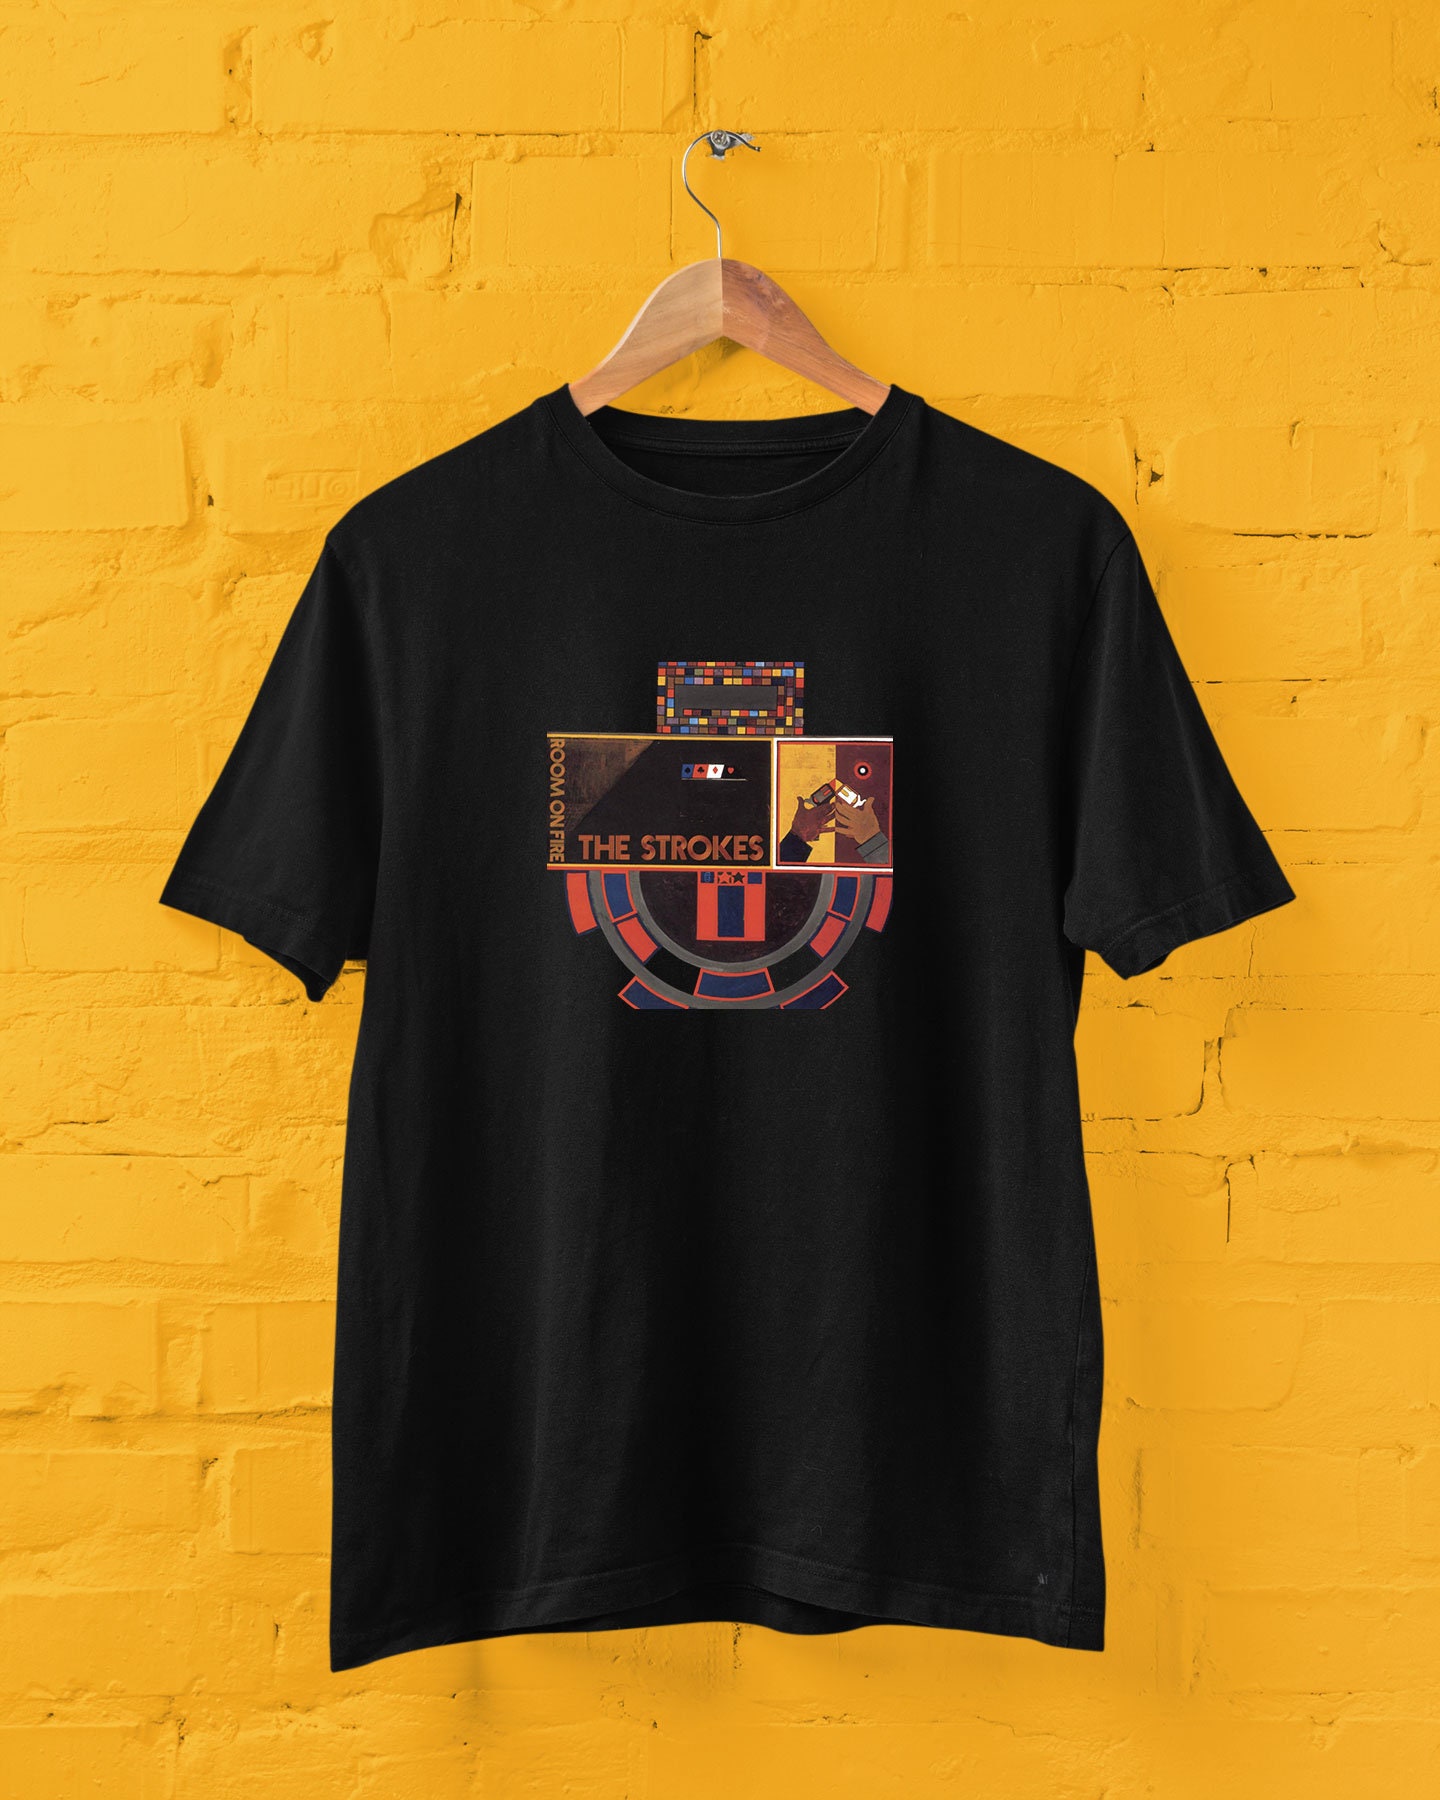 Discover The Strokes Room On Fire T-Shirt